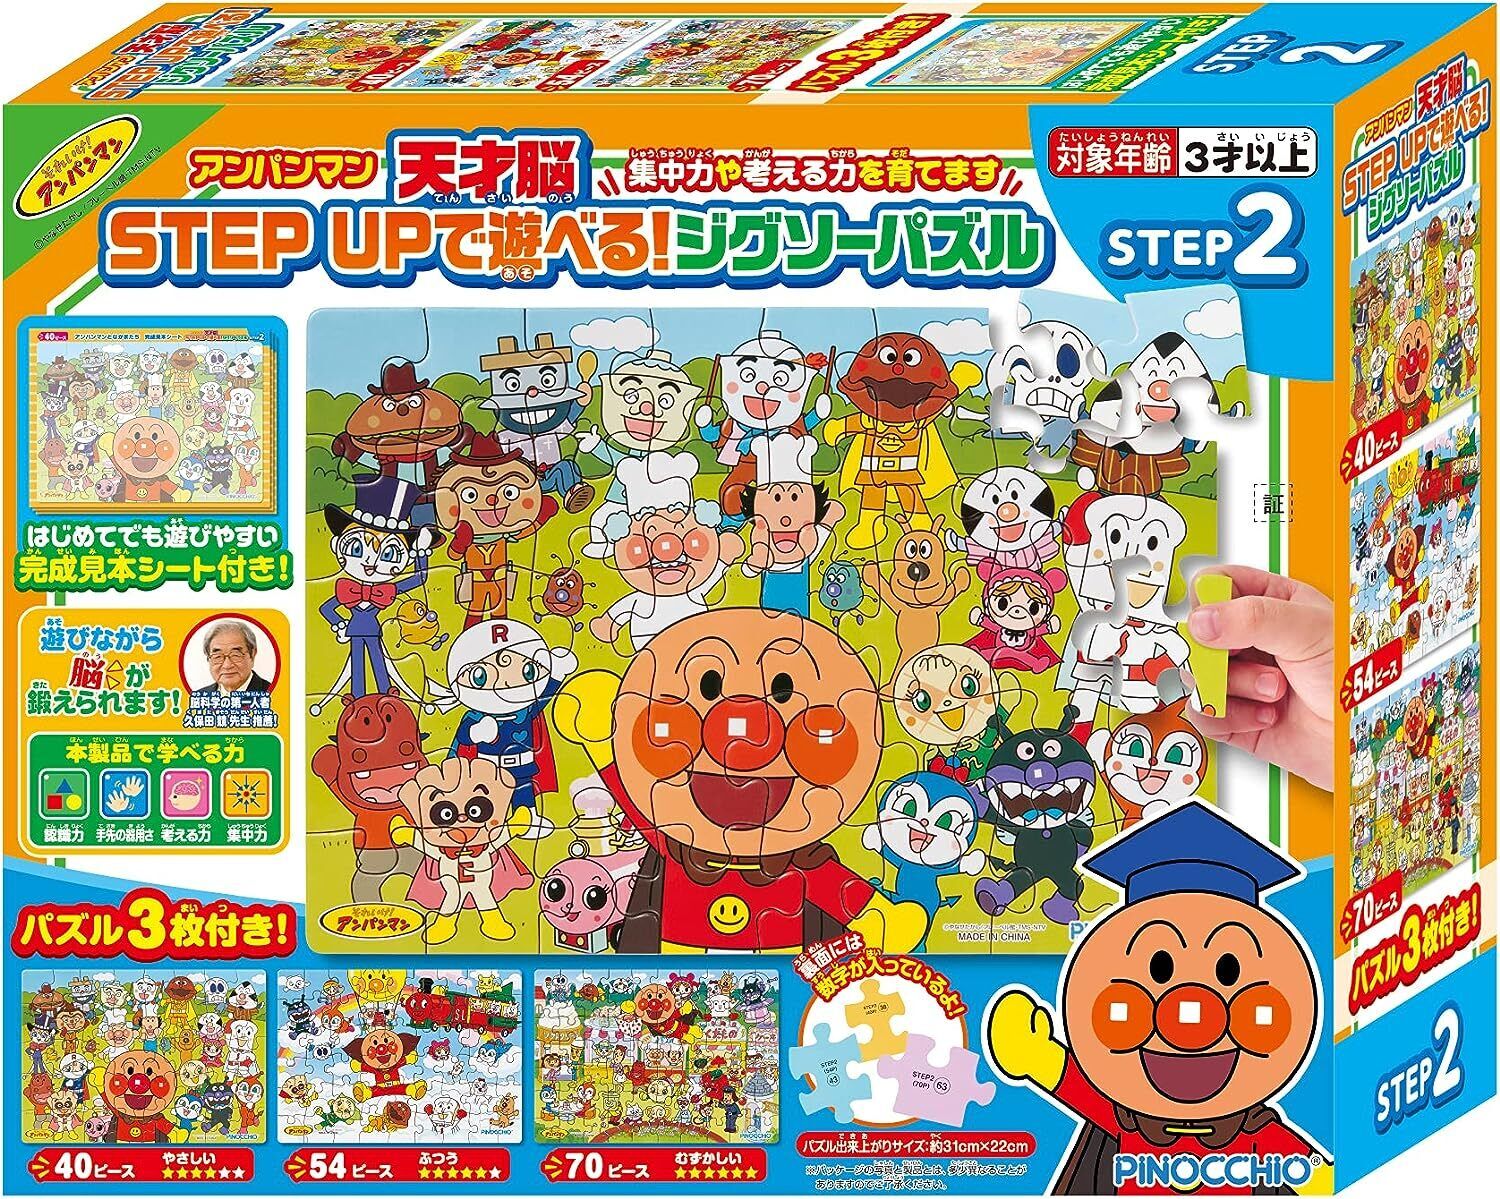 You can play with Anpanman Genius Brain STEP UP Jigsaw puzzle Step2